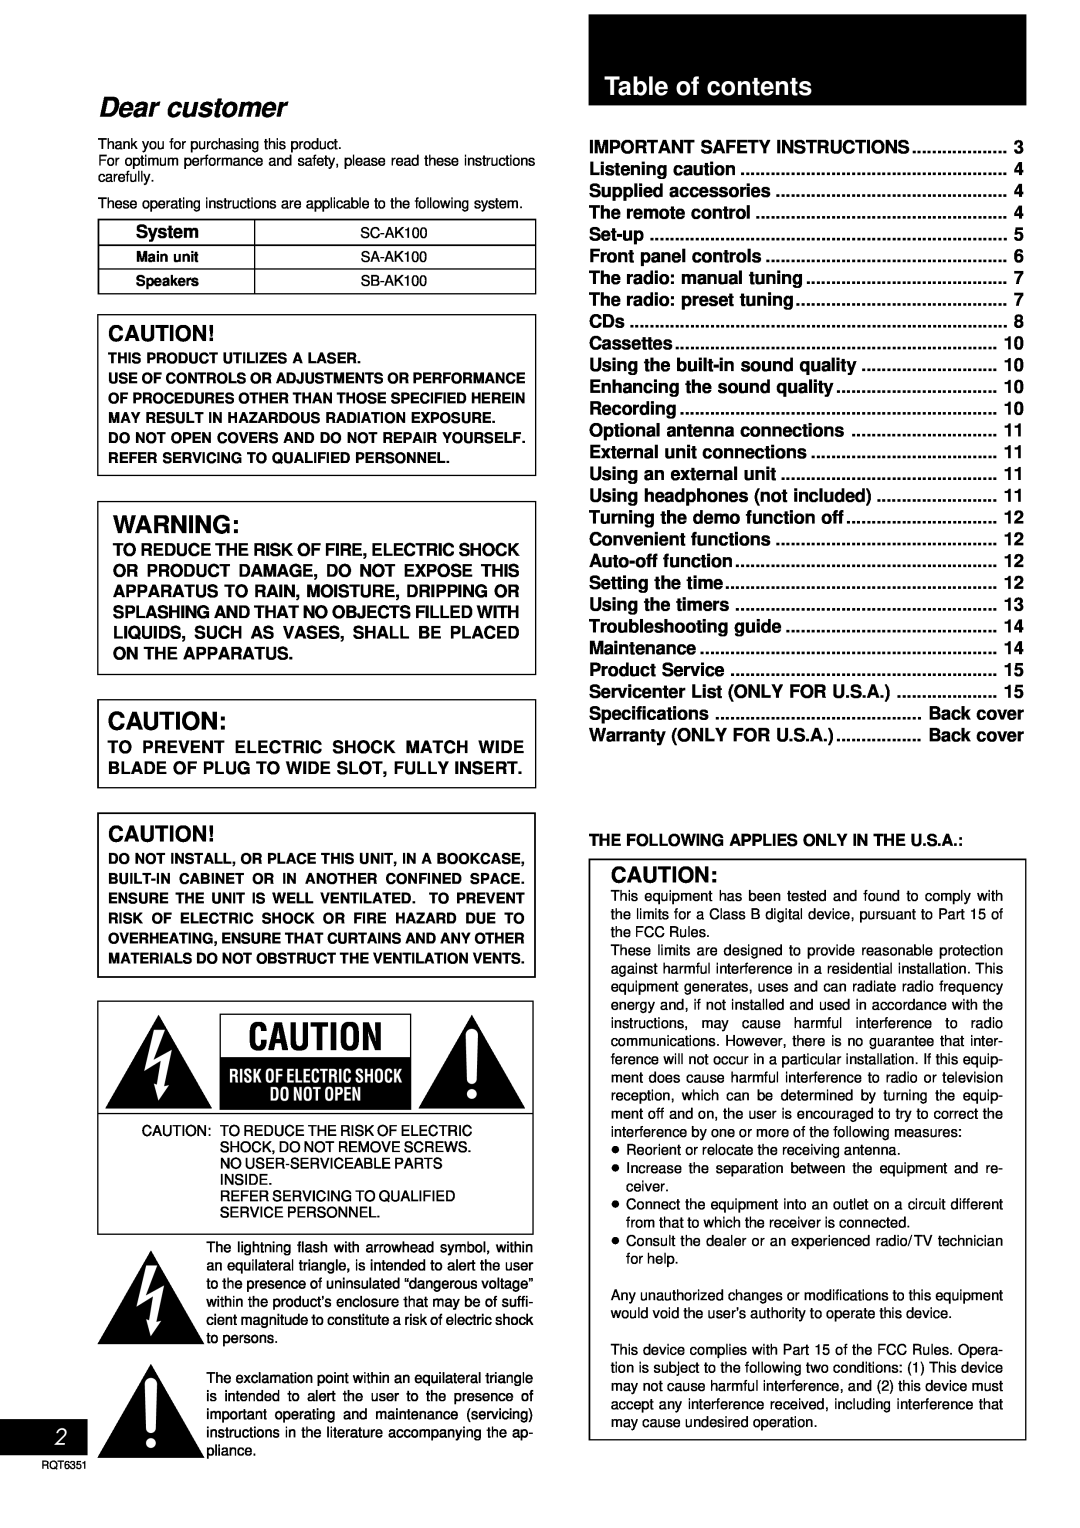 Panasonic SC-AK100 operating instructions Table of contents 